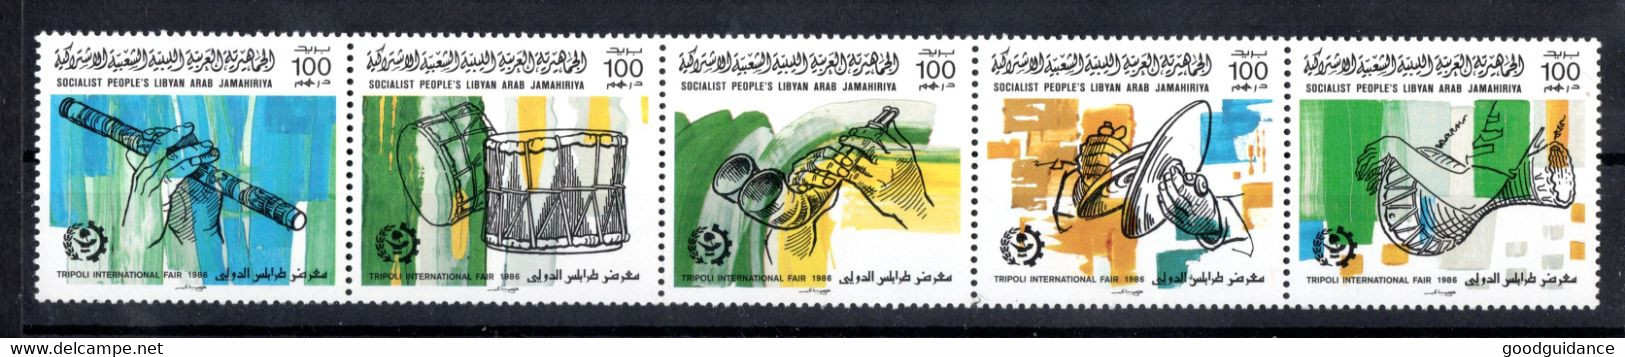 1986 - Libya - The 24th International Trade Fair, Tripoli - Musical Instruments - Strip Of 5 Stamps - MNH** - Libye